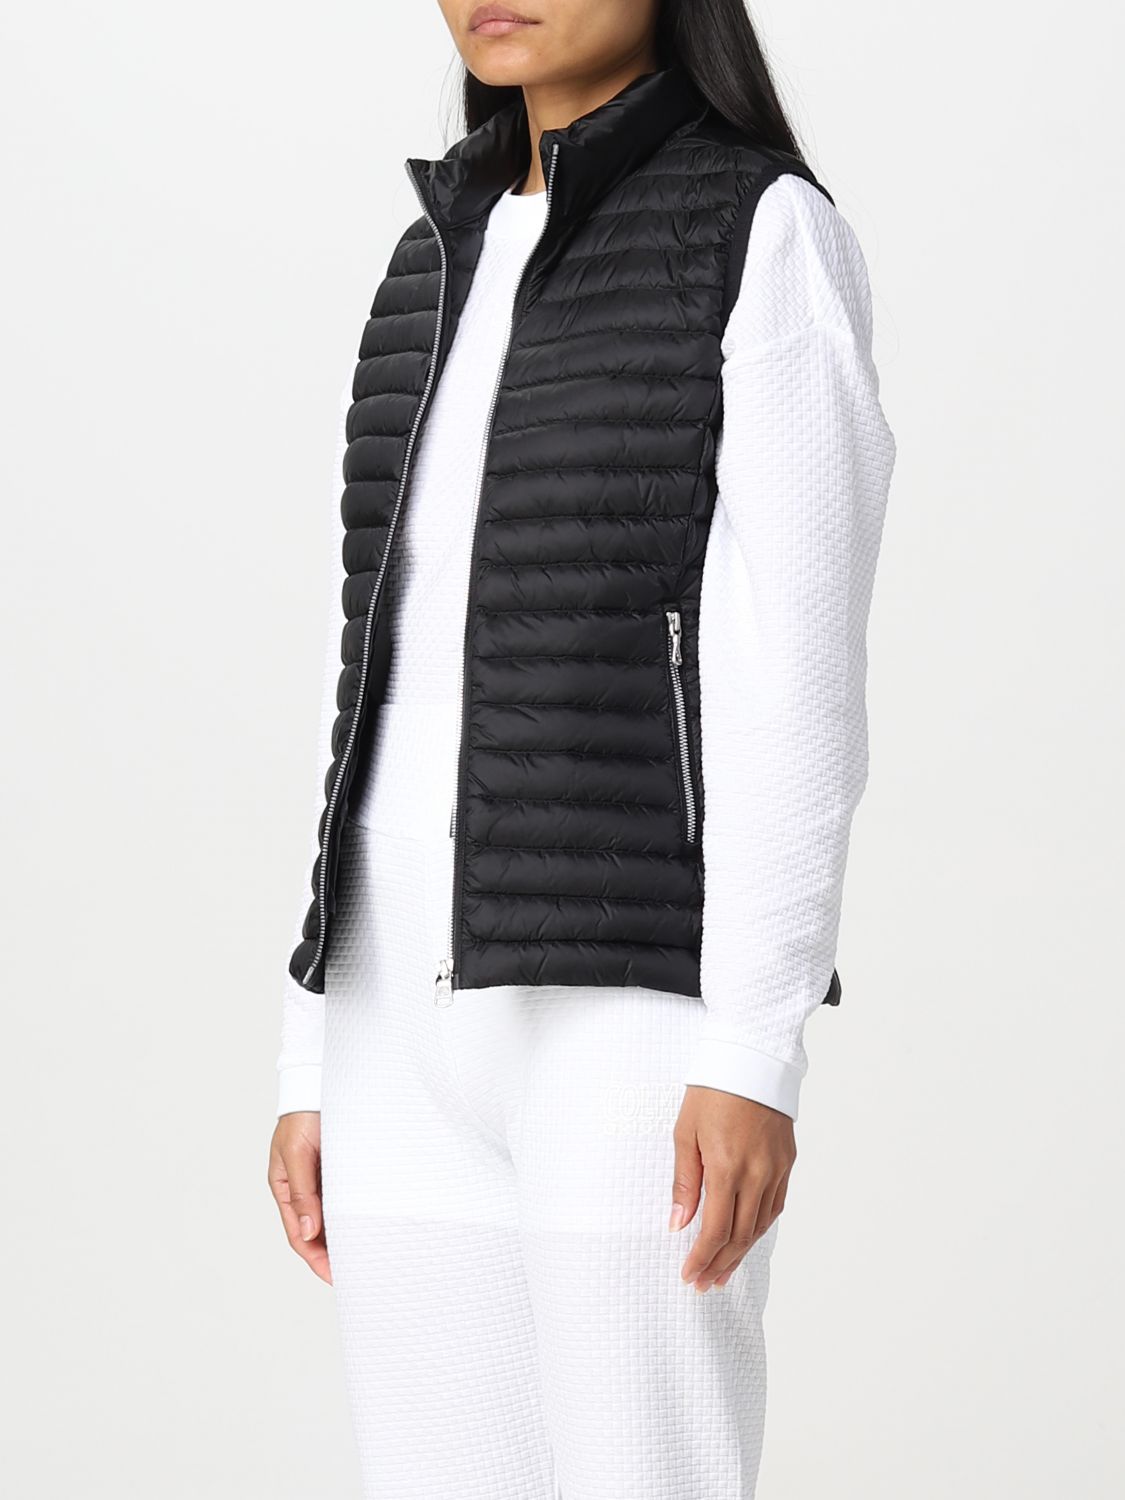 Gilet Save The Duck: Gilet Save The Duck donna nero 1 3